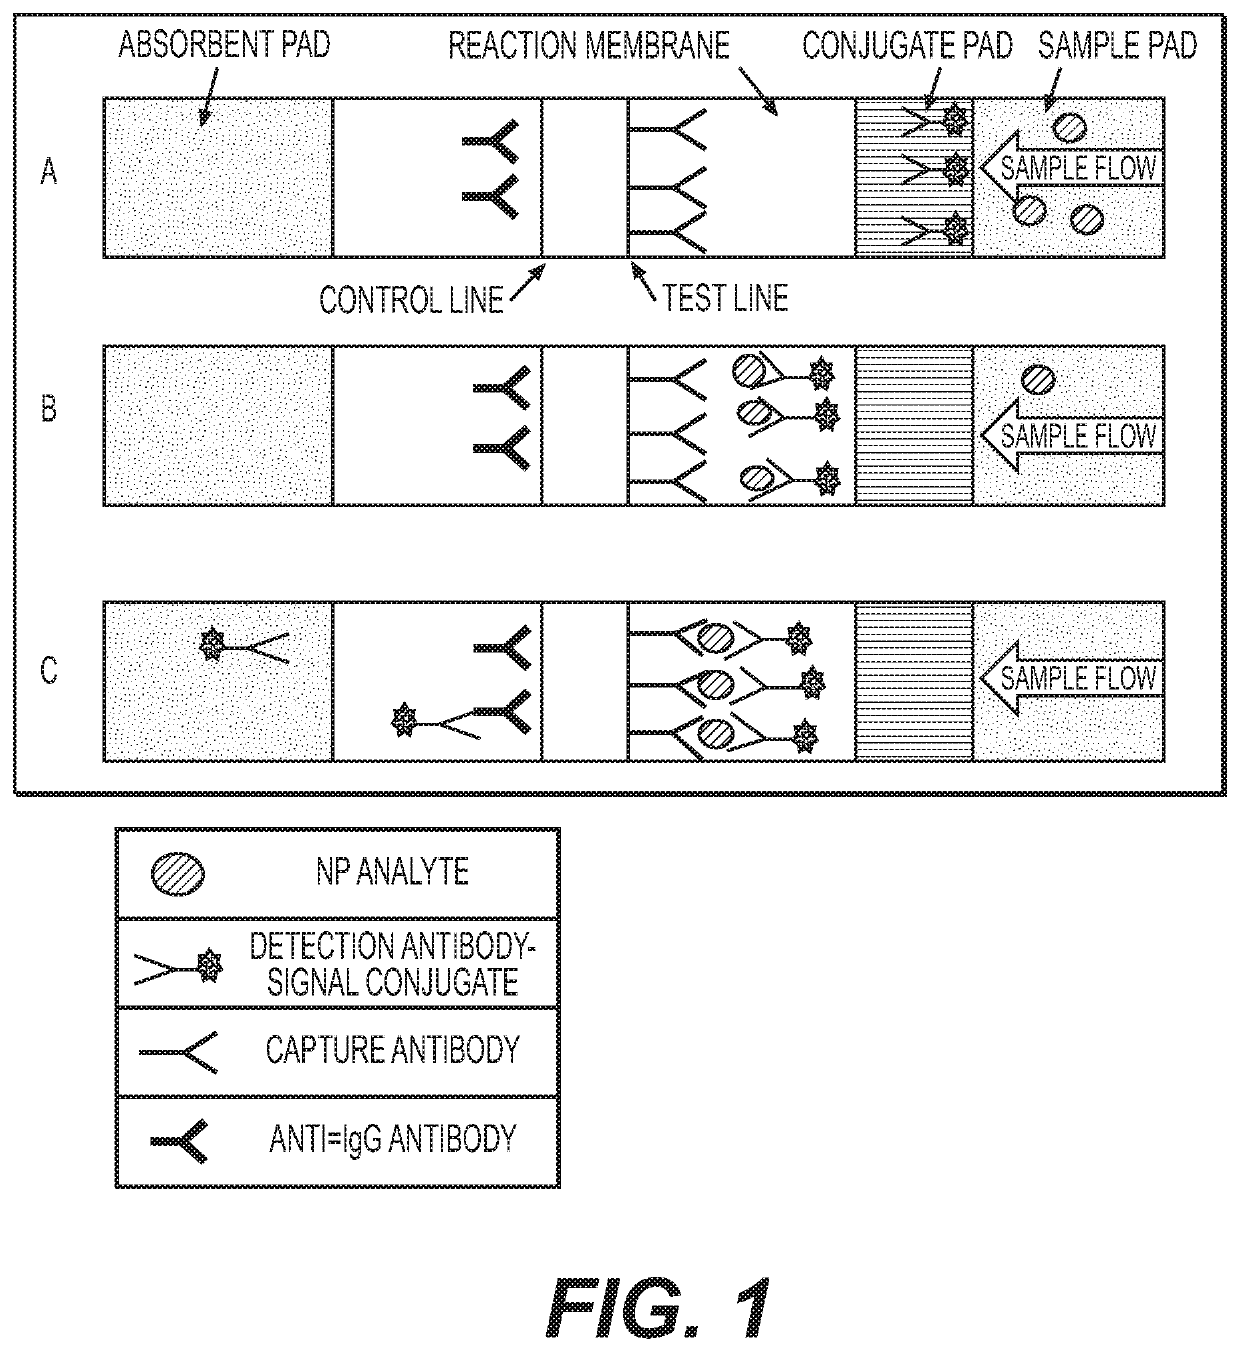 Antibody pairs for use in a rapid influenza b diagnostic test